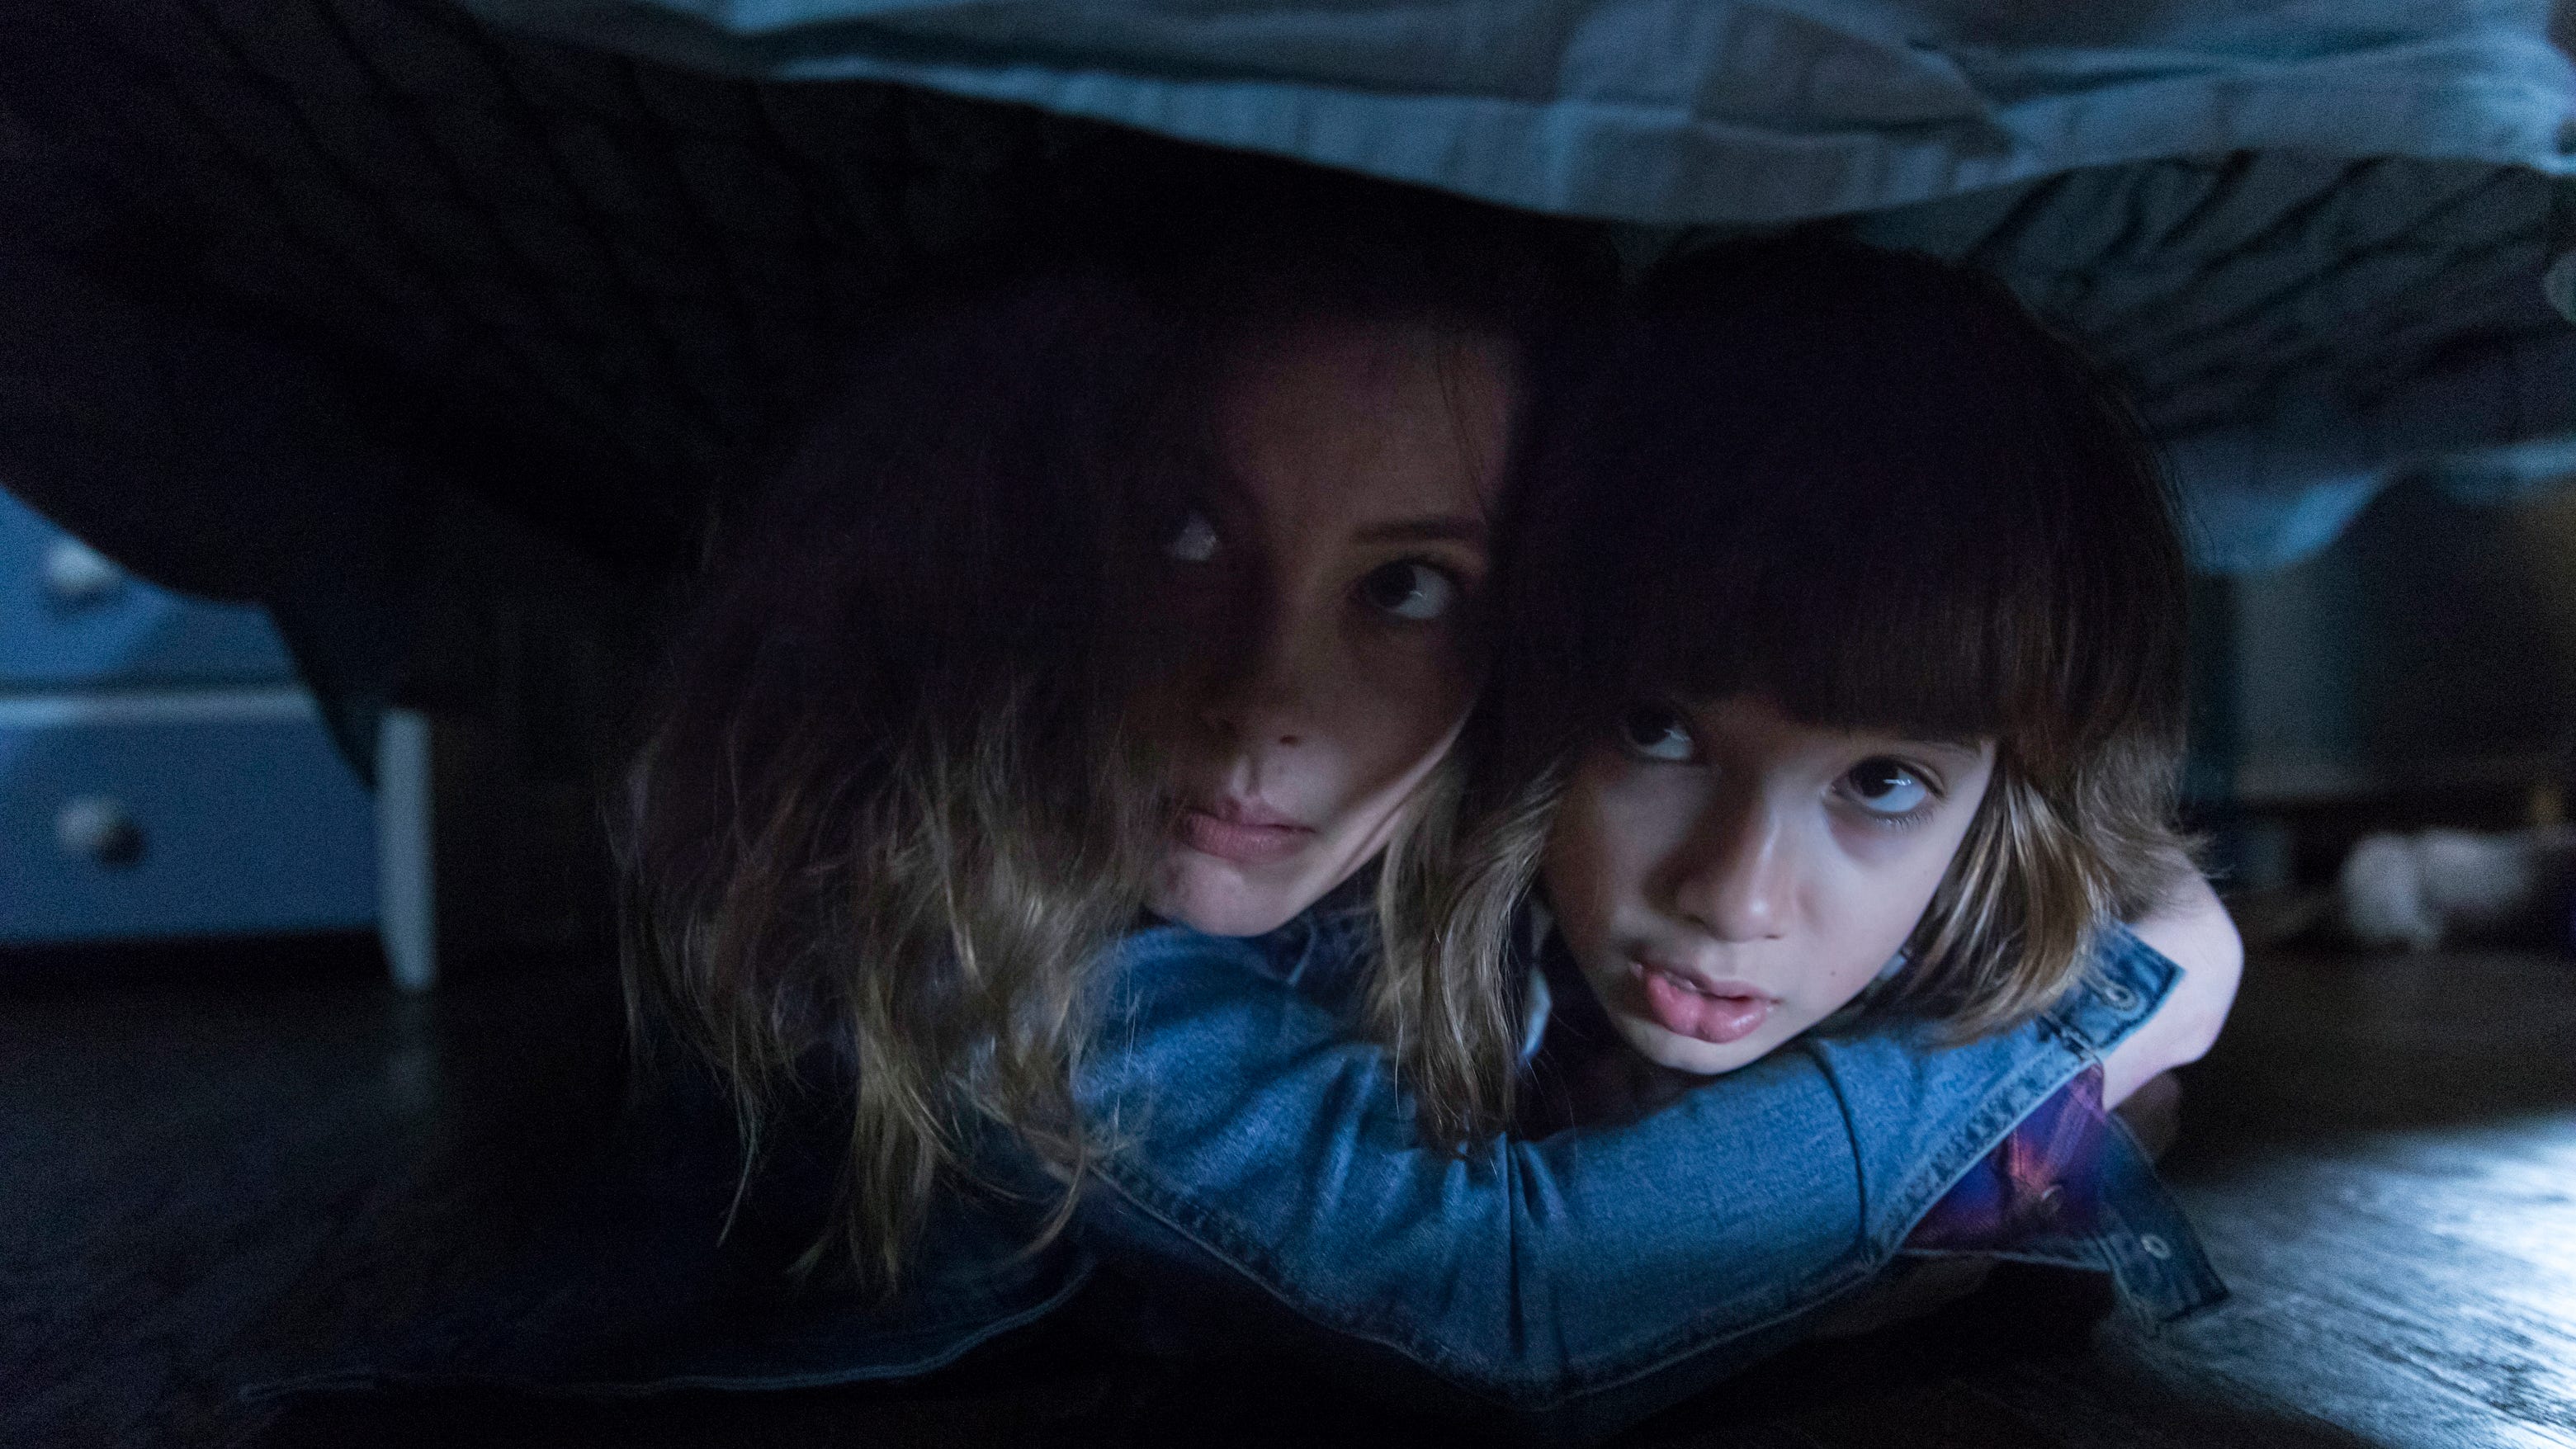 Review: Horror movie 'Come Play' makes a monster out of screen time